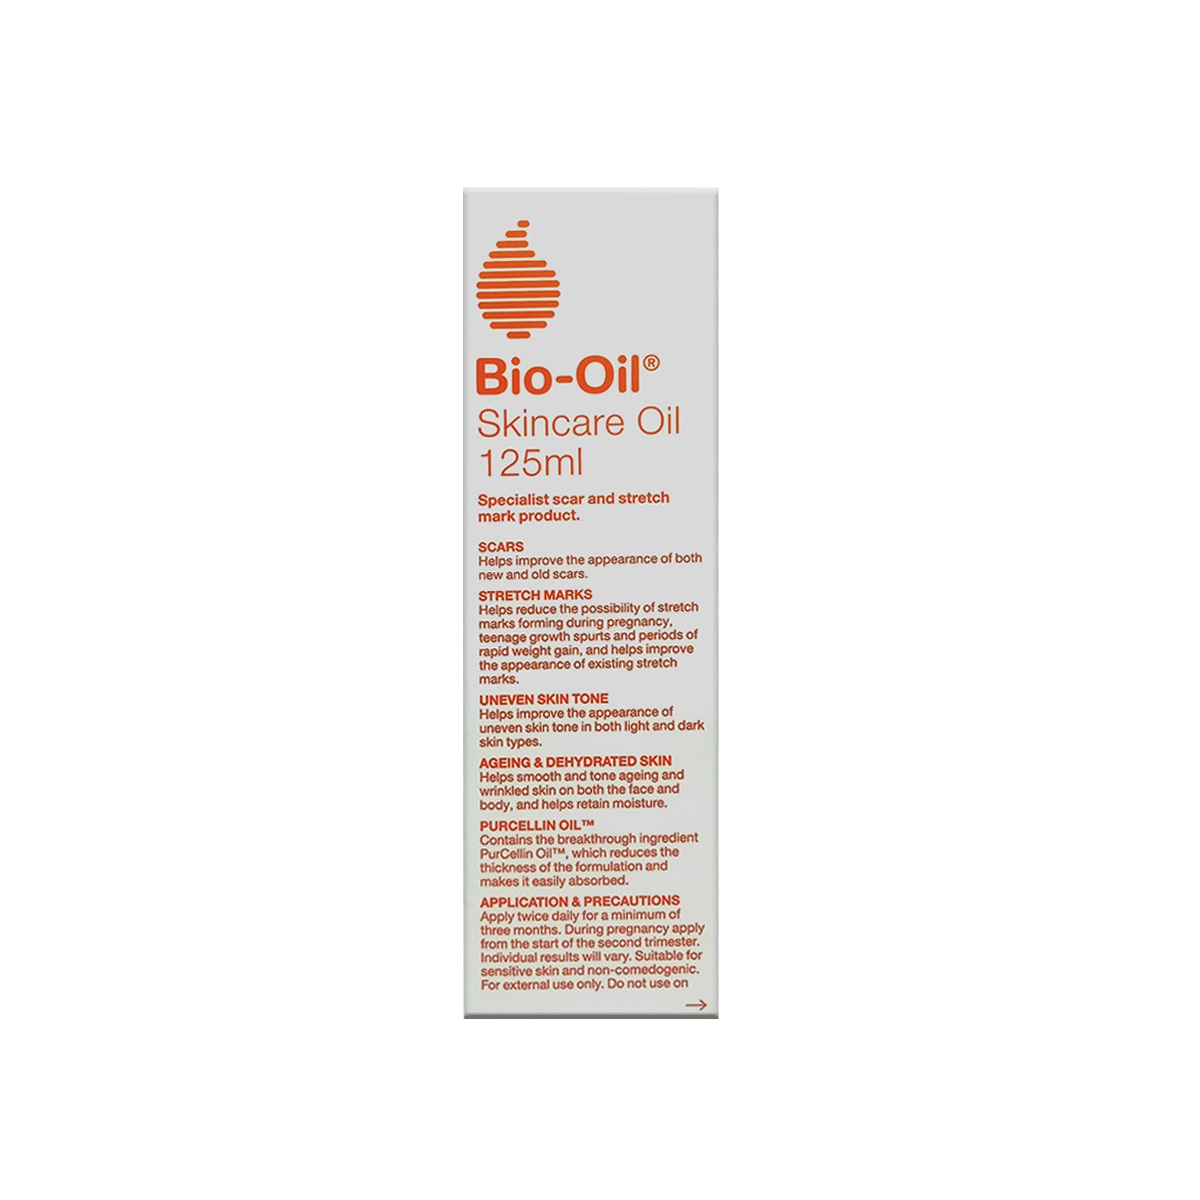 First product image of Bio-Oil Skincare Oil 125ml